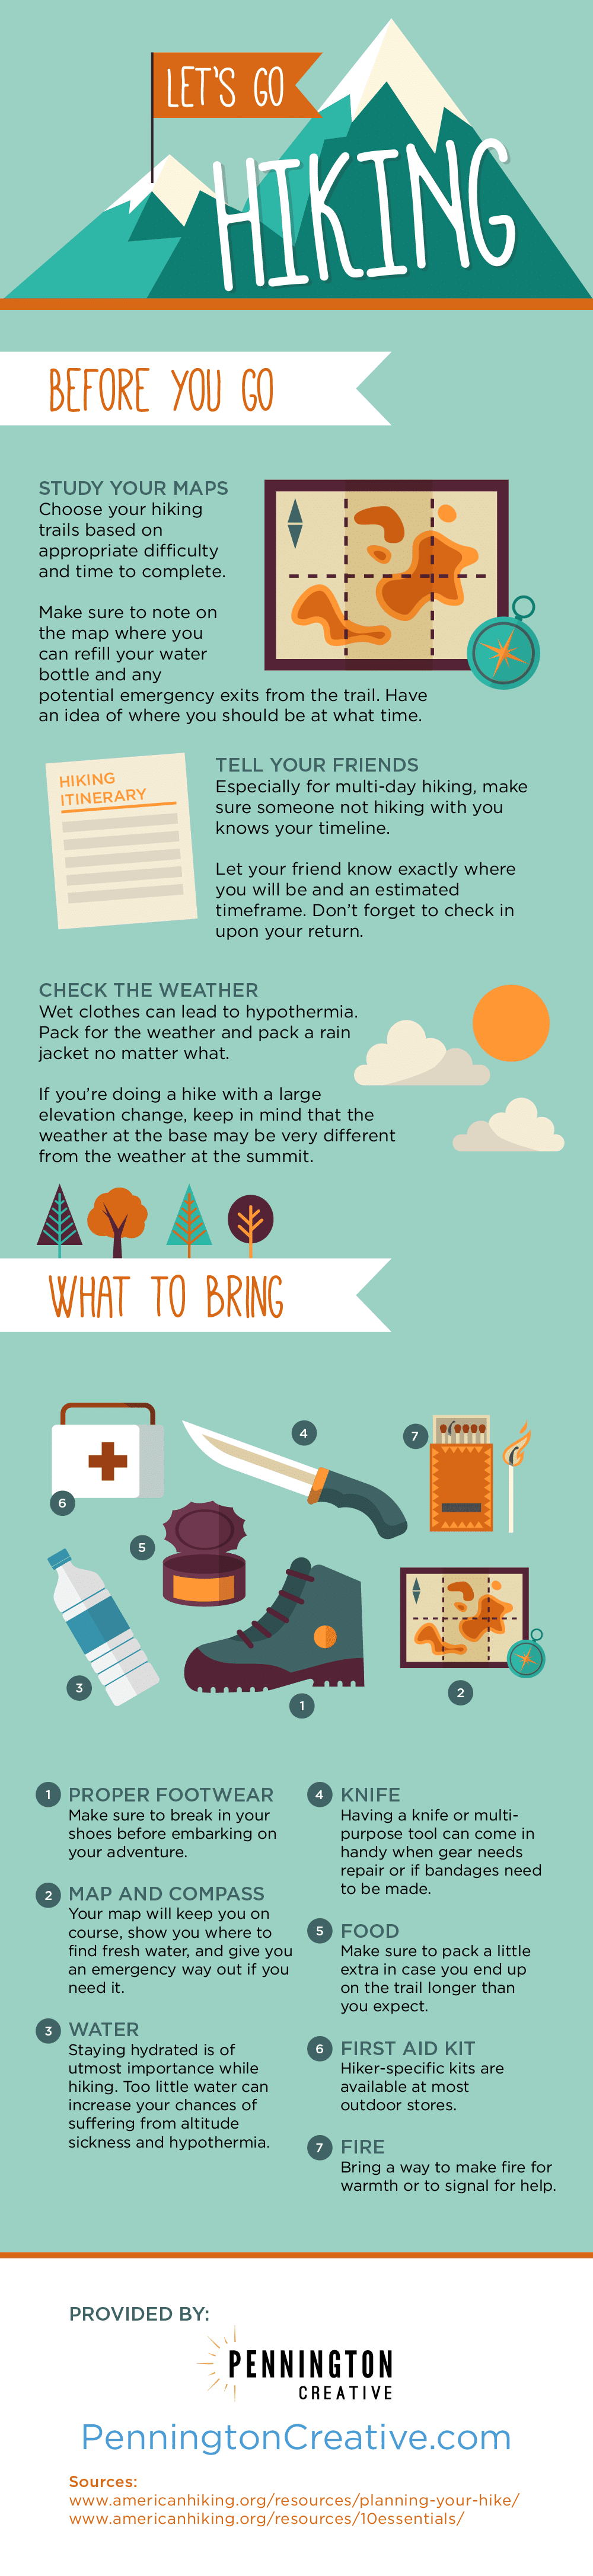 Let's Go Hiking Infographic